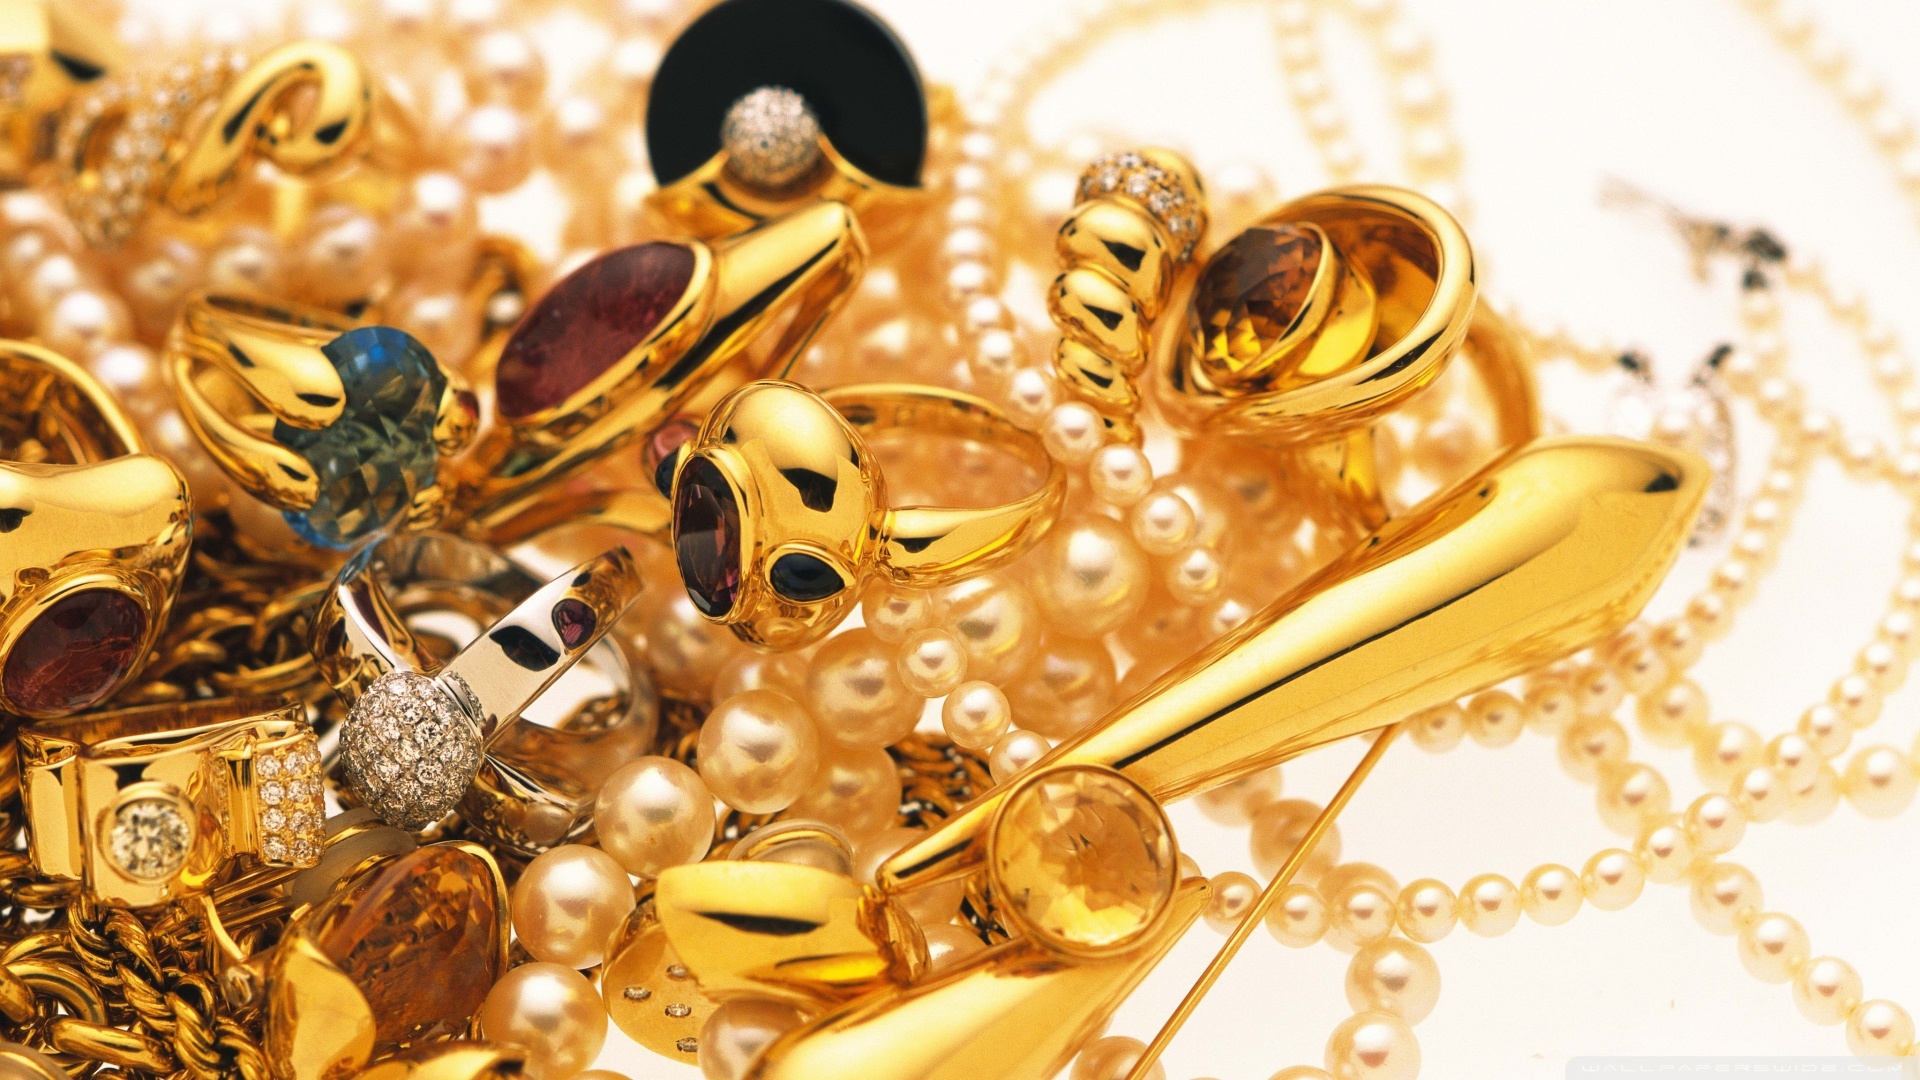 Gold Jewellery Stock Photos Images and Backgrounds for Free Download